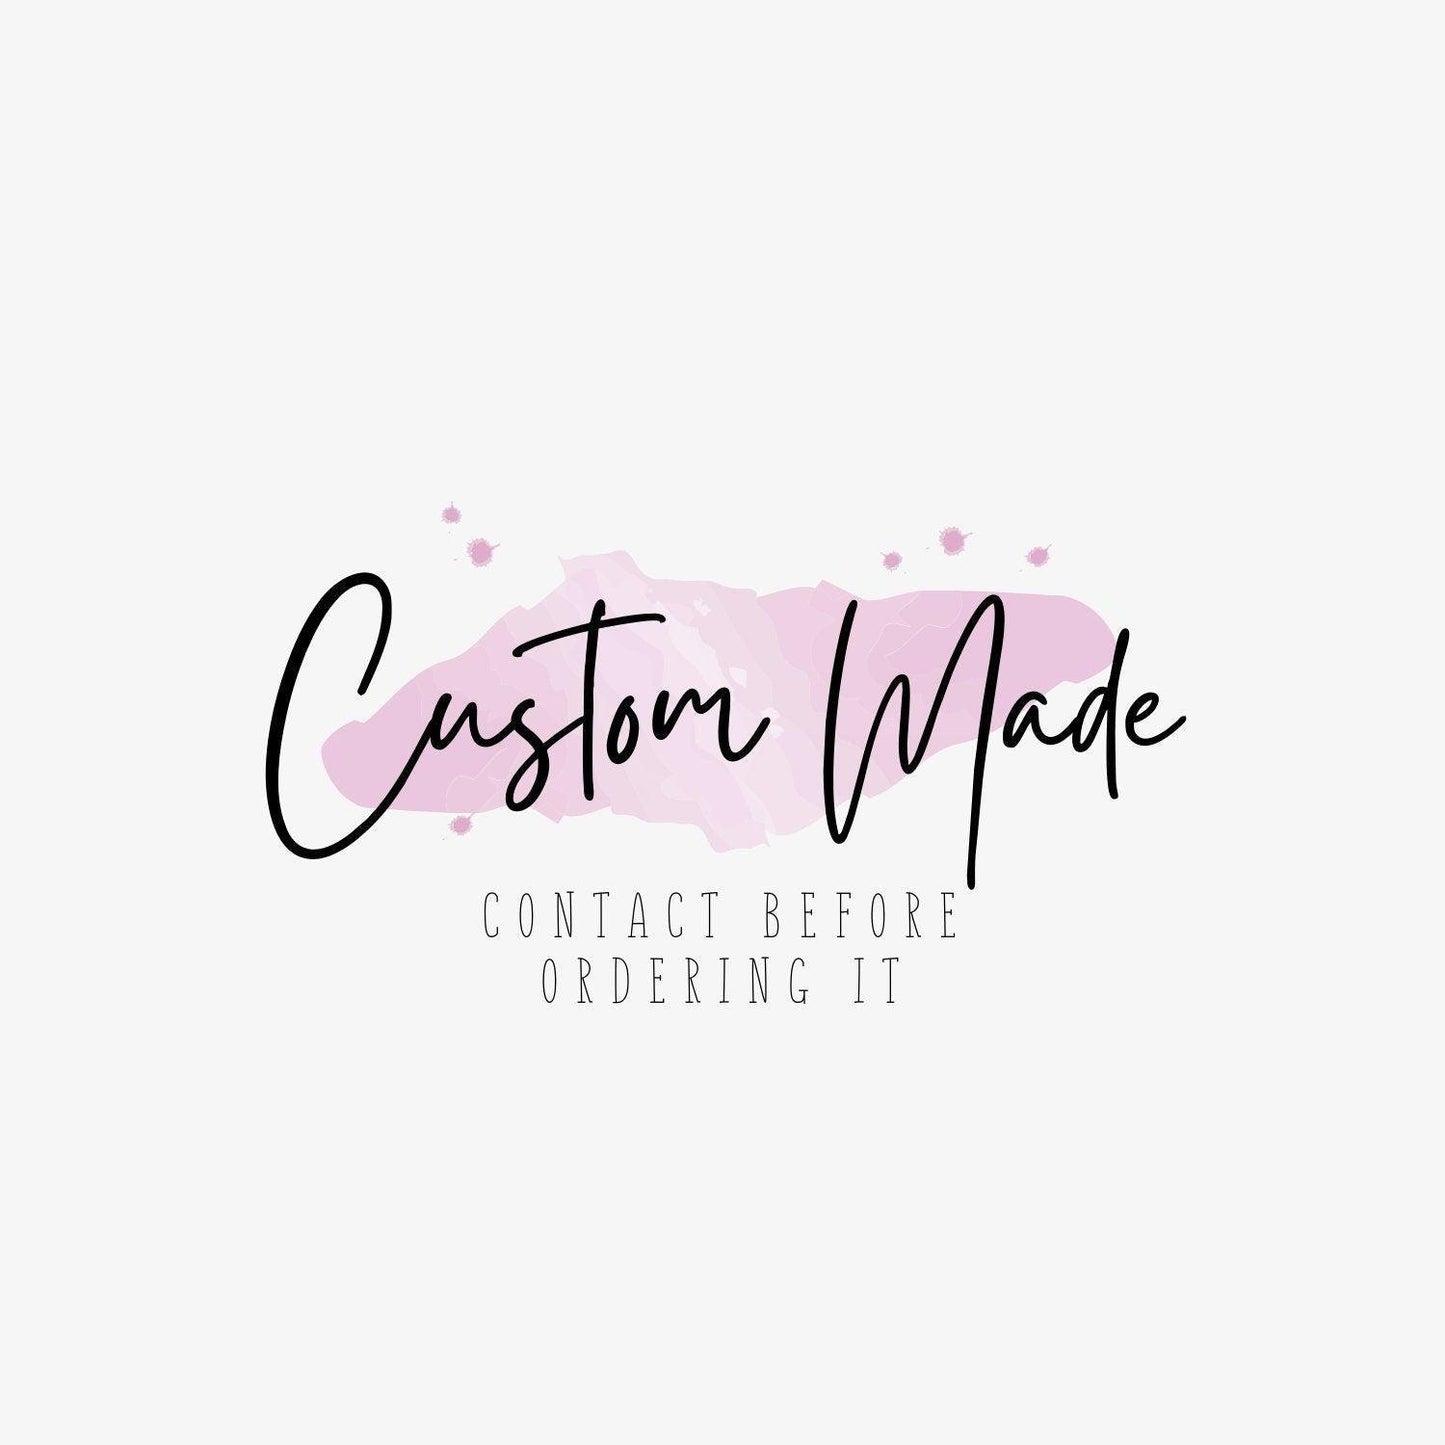 Custom Matching Outfits: Personalized, Stylish Sets for Any Occasion - Made by Request - 4Lovebirds